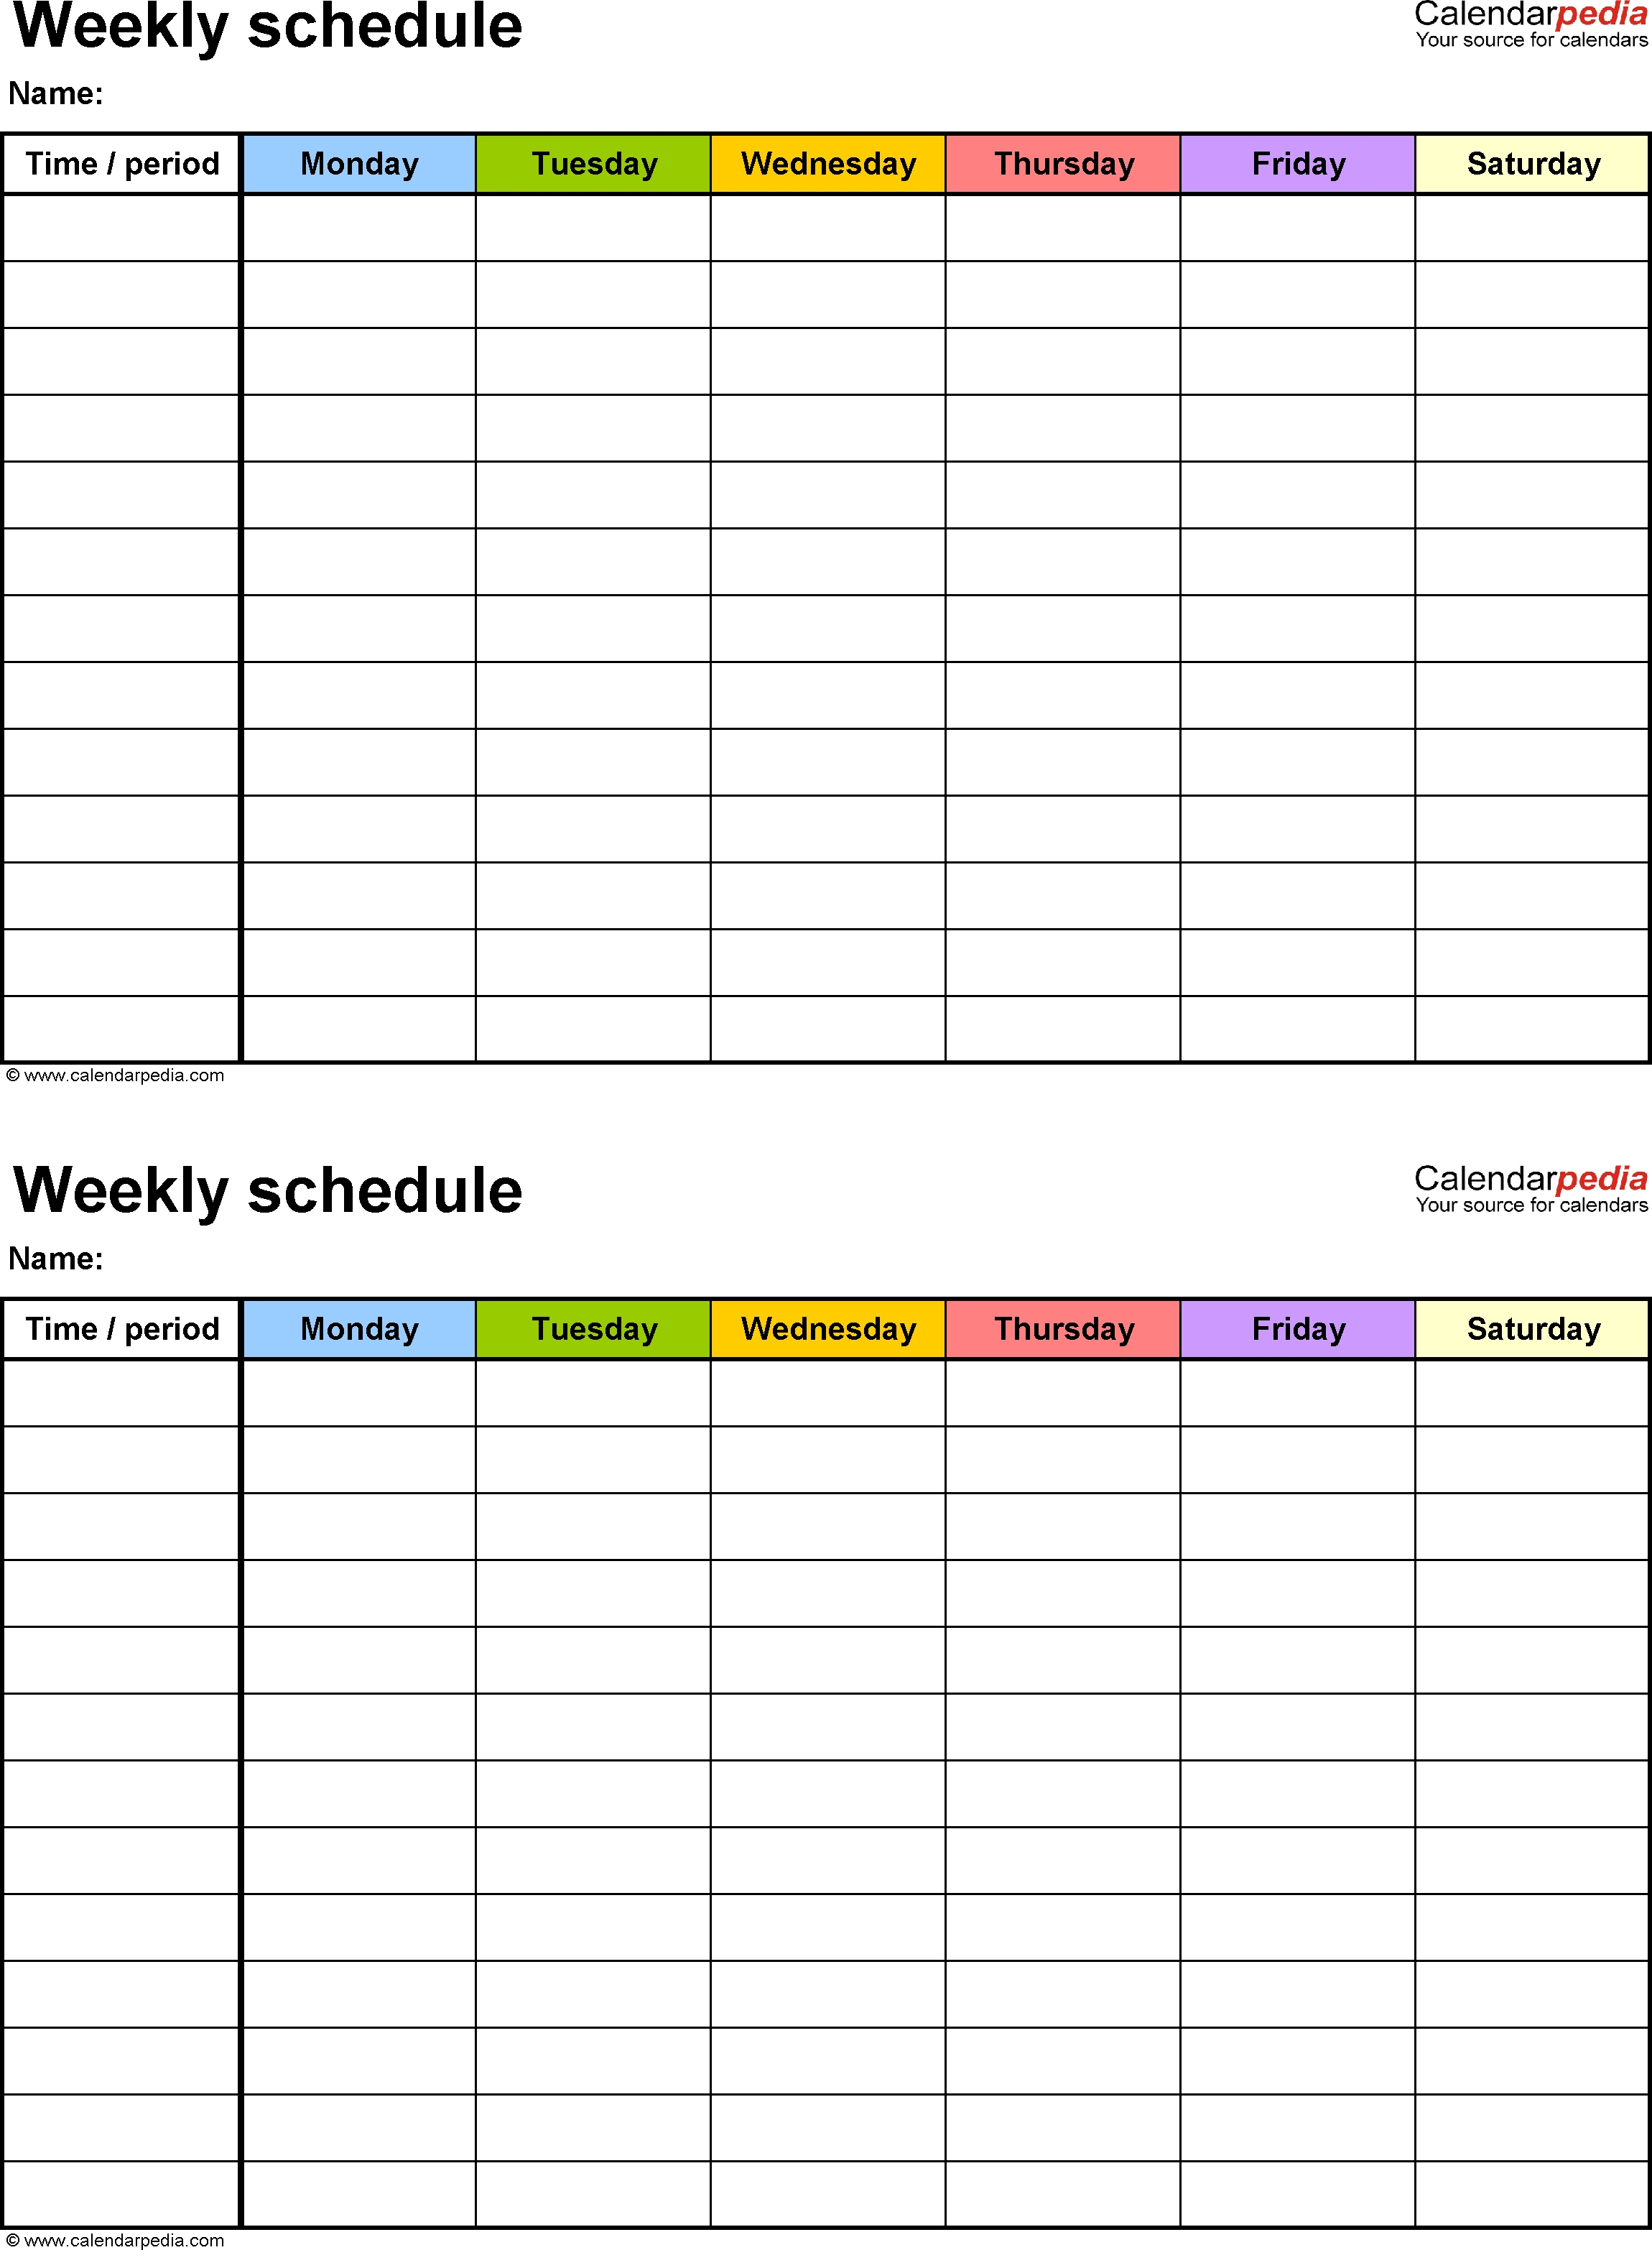 Free Weekly Schedule Templates For Word - 18 Templates in Blank 7 Day Calendar Template